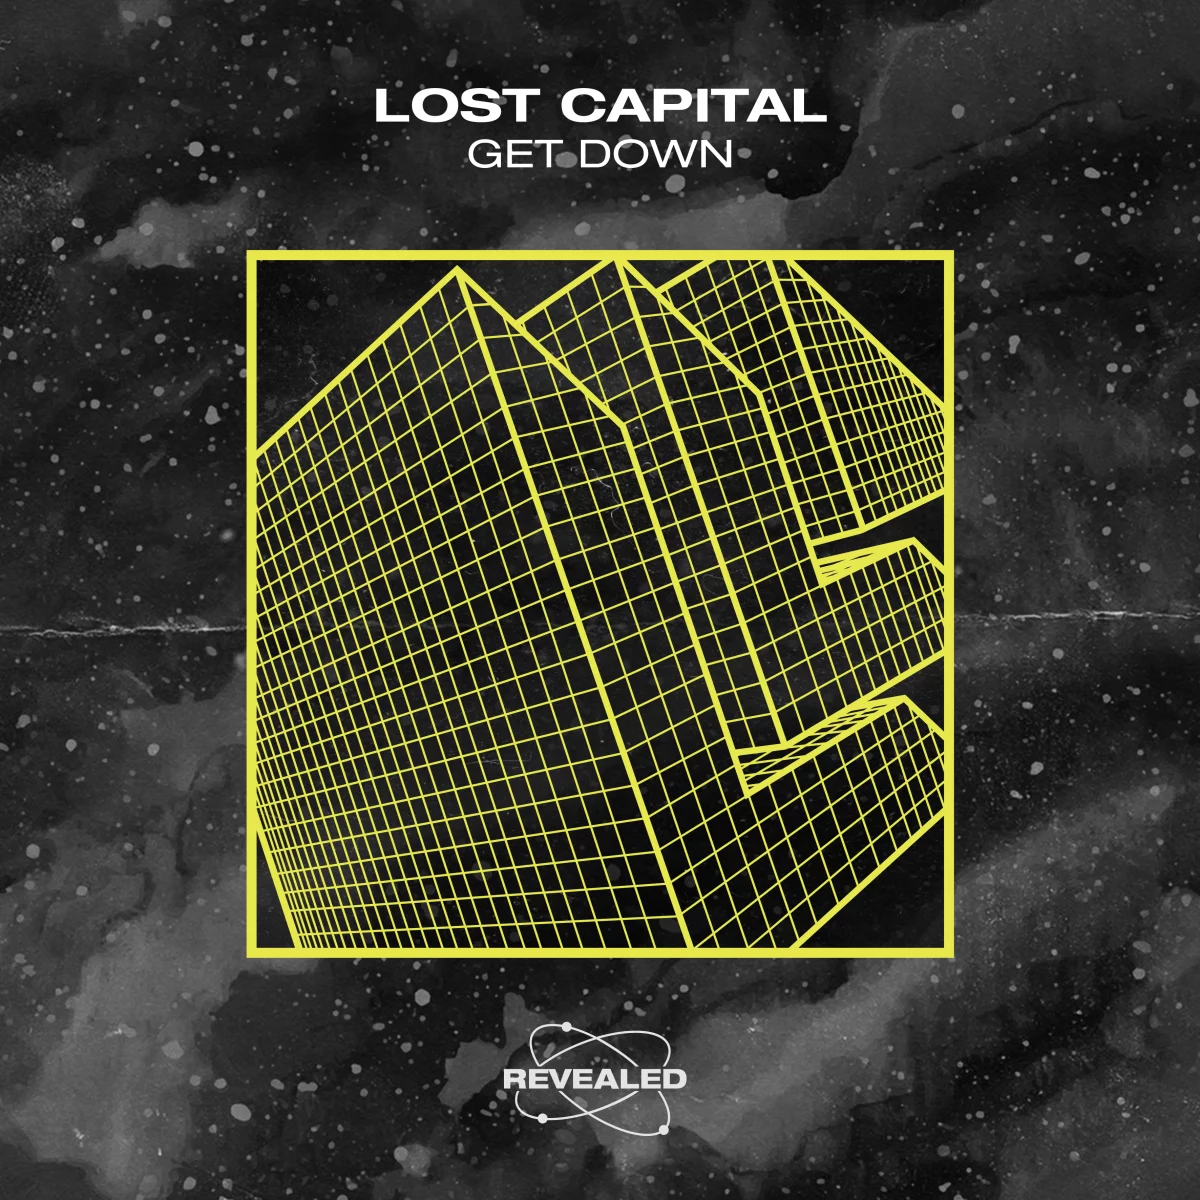 Get Down - Lost Capital⁠ 